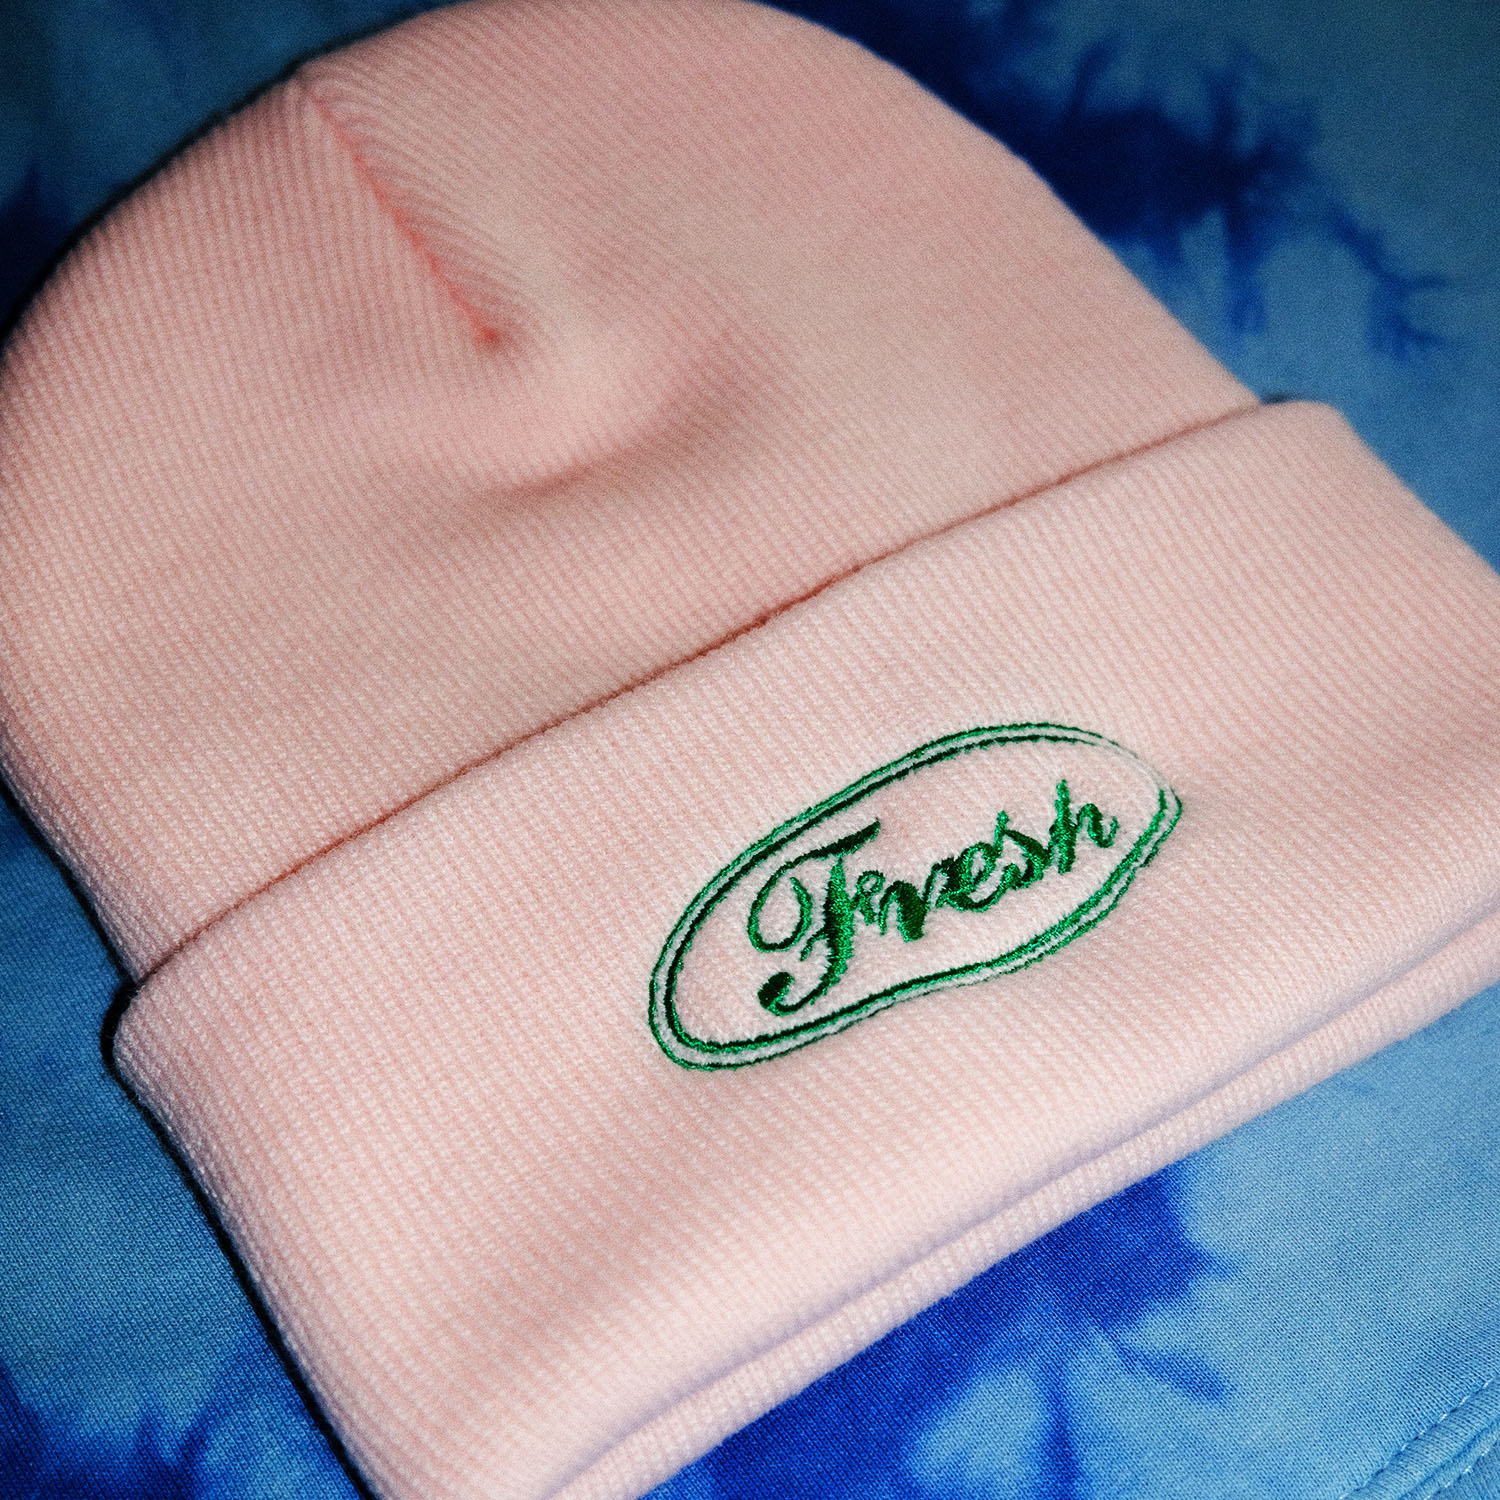 Fresh Motors – Light Pink & Green Embroidered Beanie